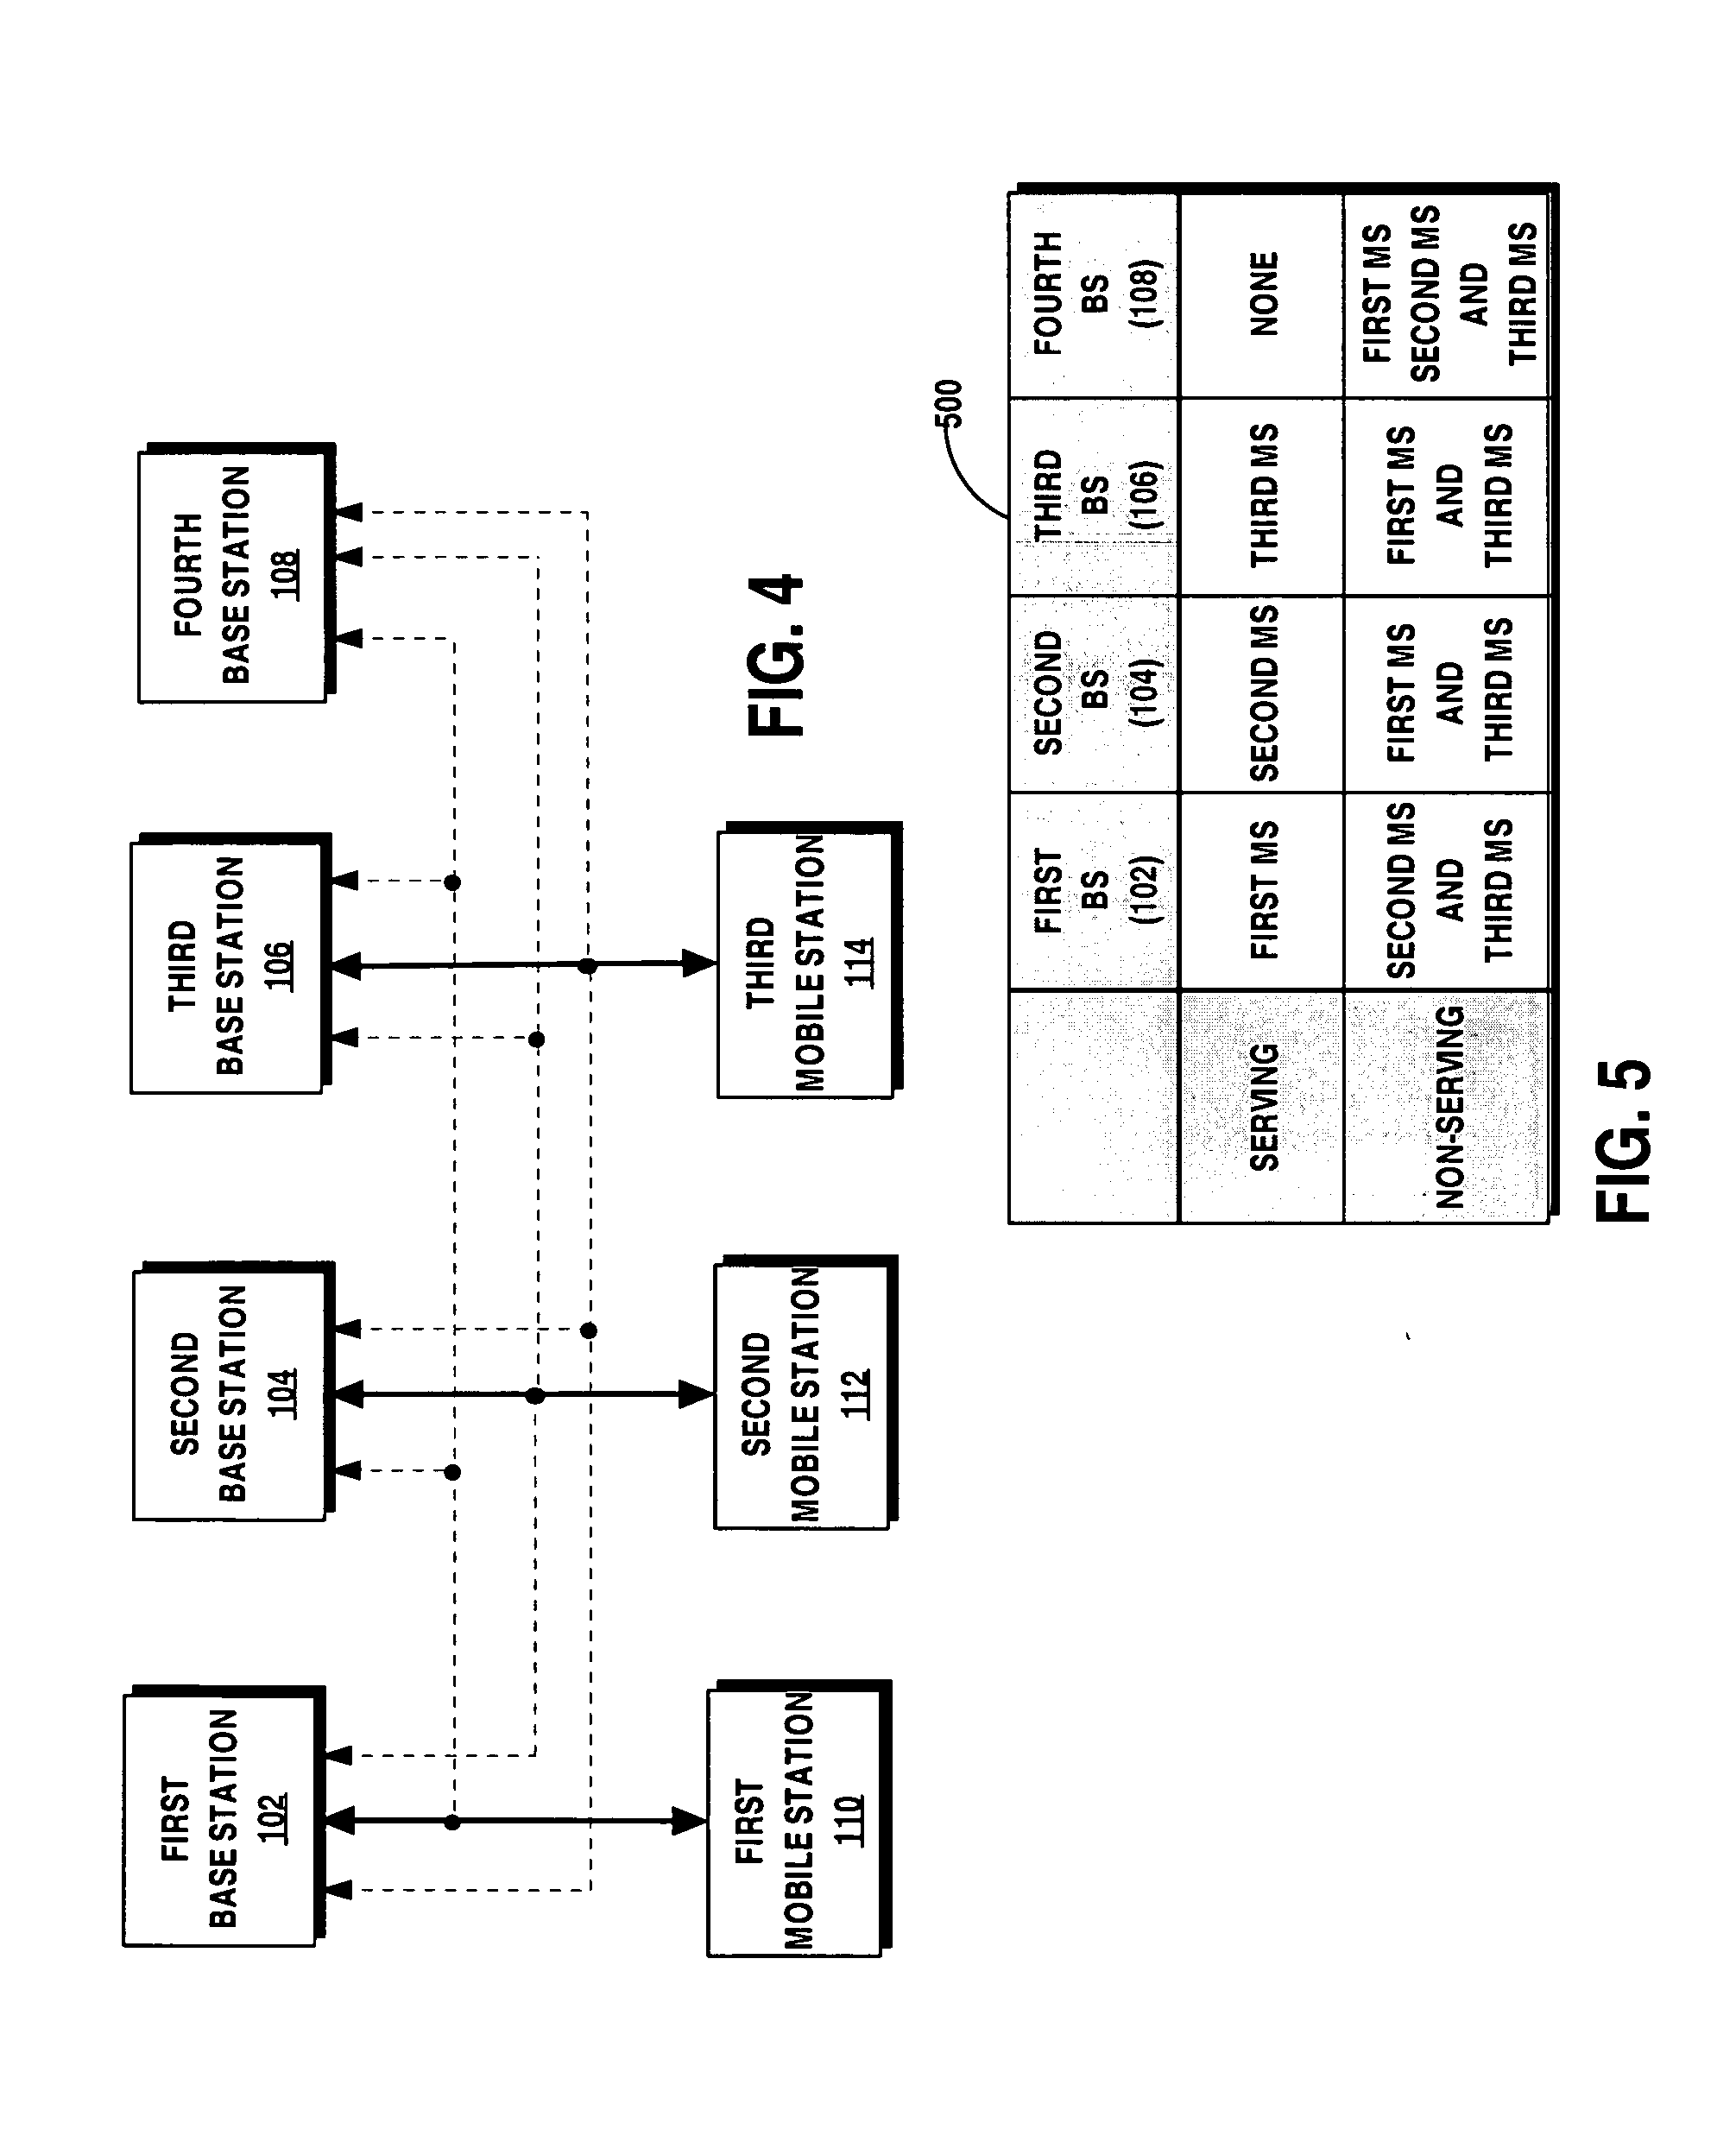 Apparatus, system, and method for managing reverse link communication resources in a distributed communication system